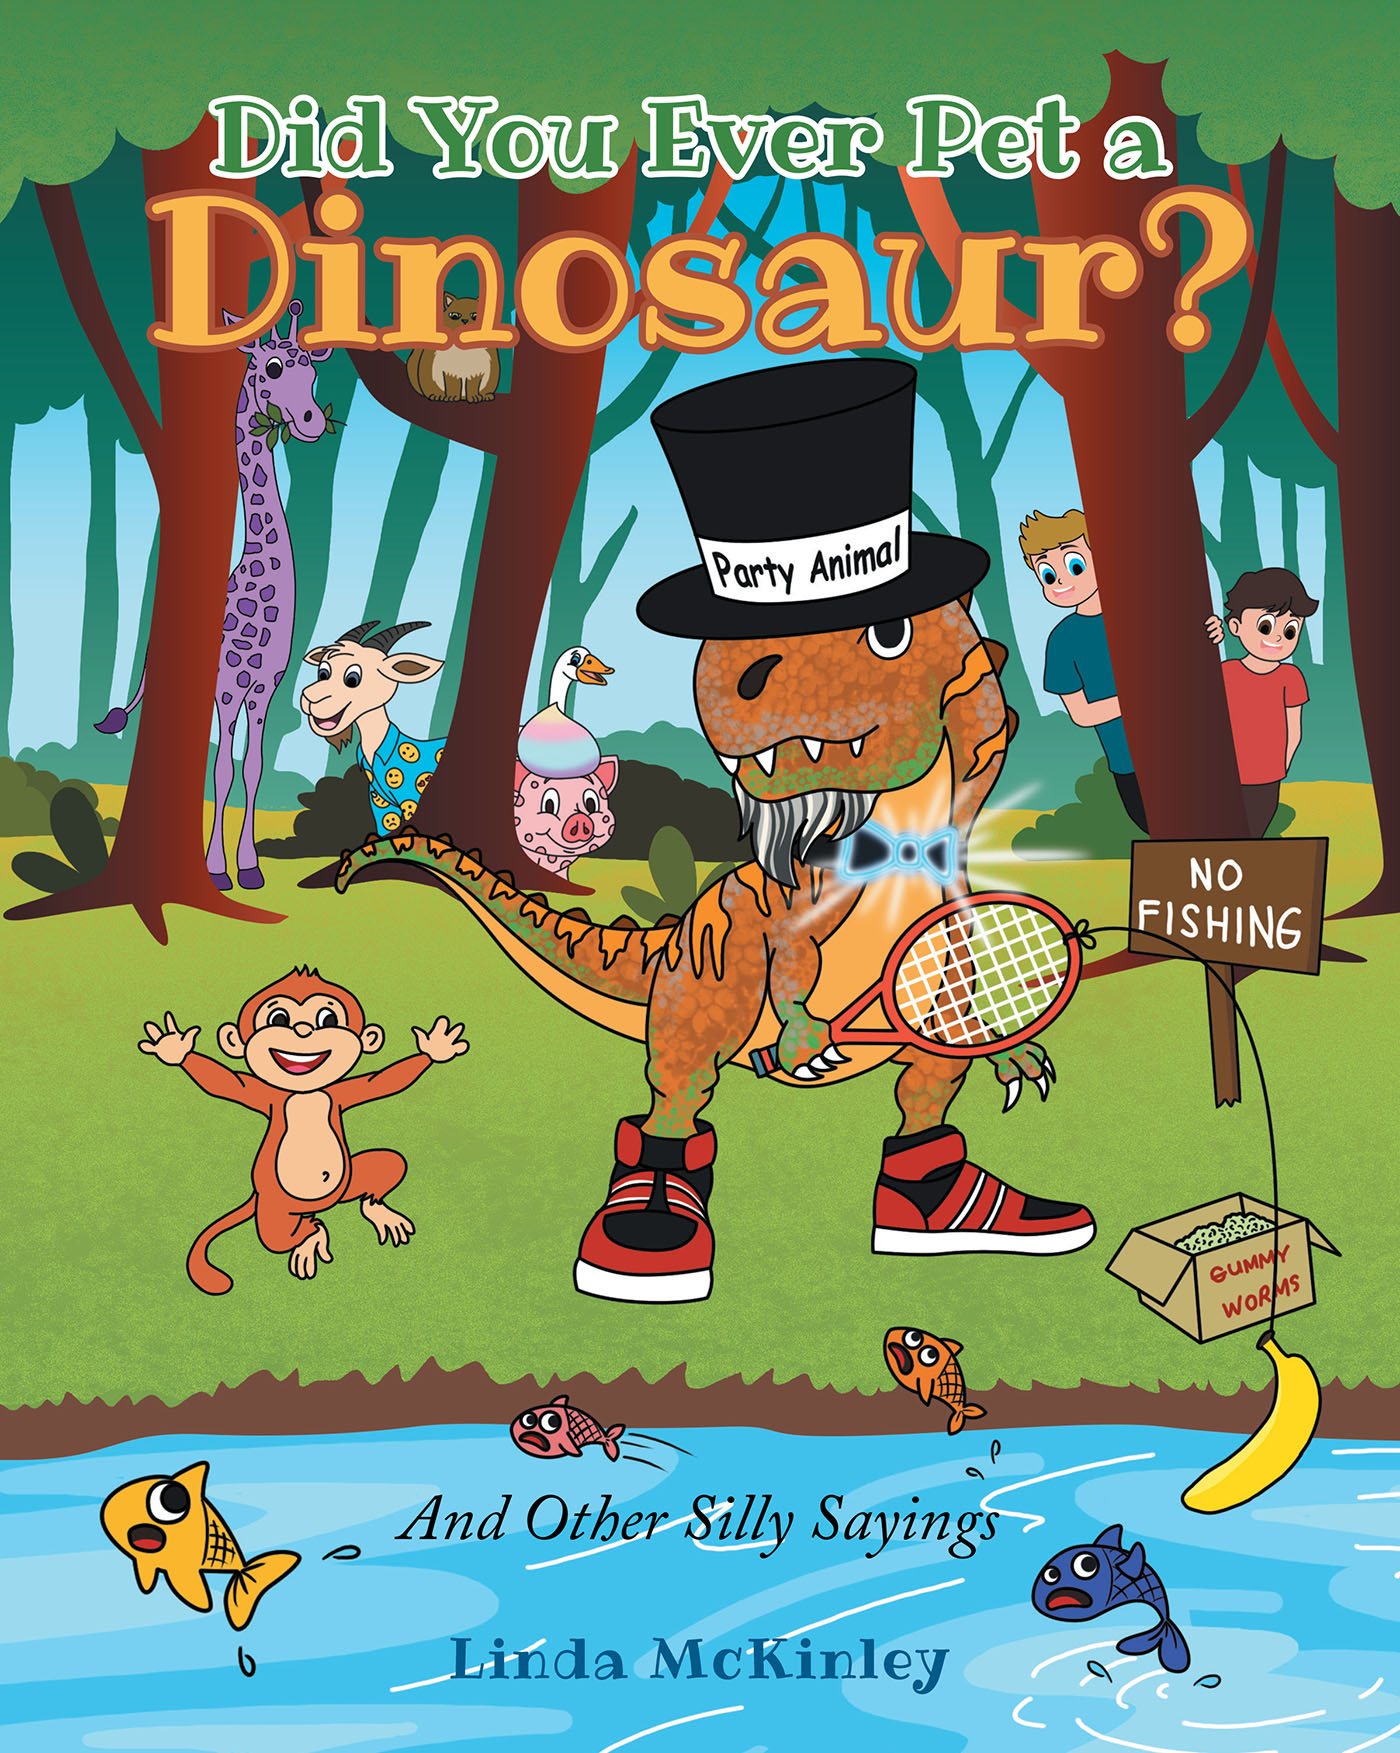 Author Linda McKinley’s New Book, "Did You Ever Pet a Dinosaur? And Other Silly Sayings," is a Collection of Joyful Rhymes That Entertains Readers of All Ages